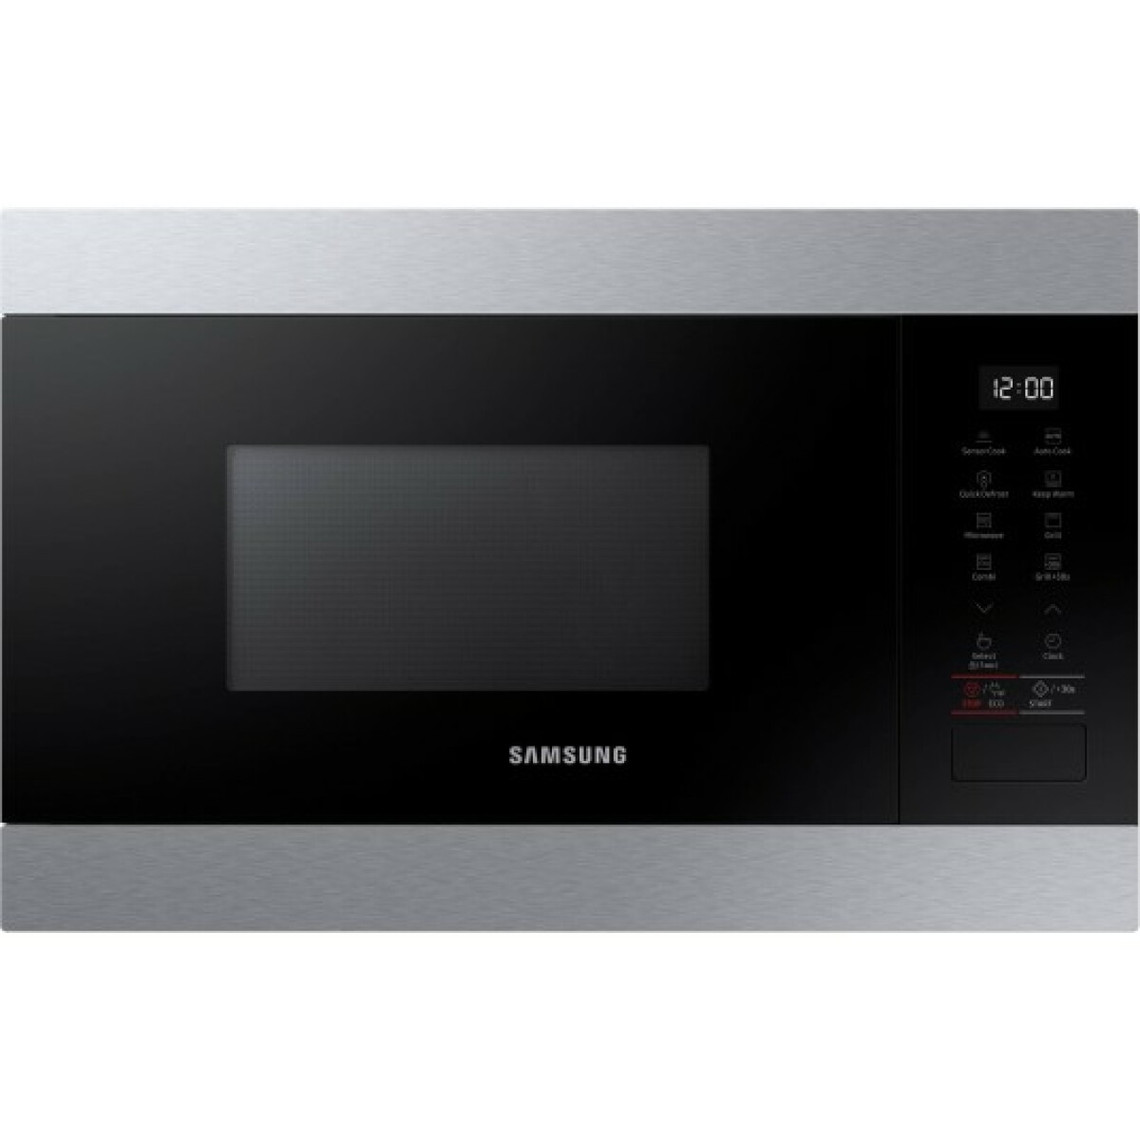 Samsung Micro ondes Encastrable MS22M8274AT 22 litres, 850 Watts, inox